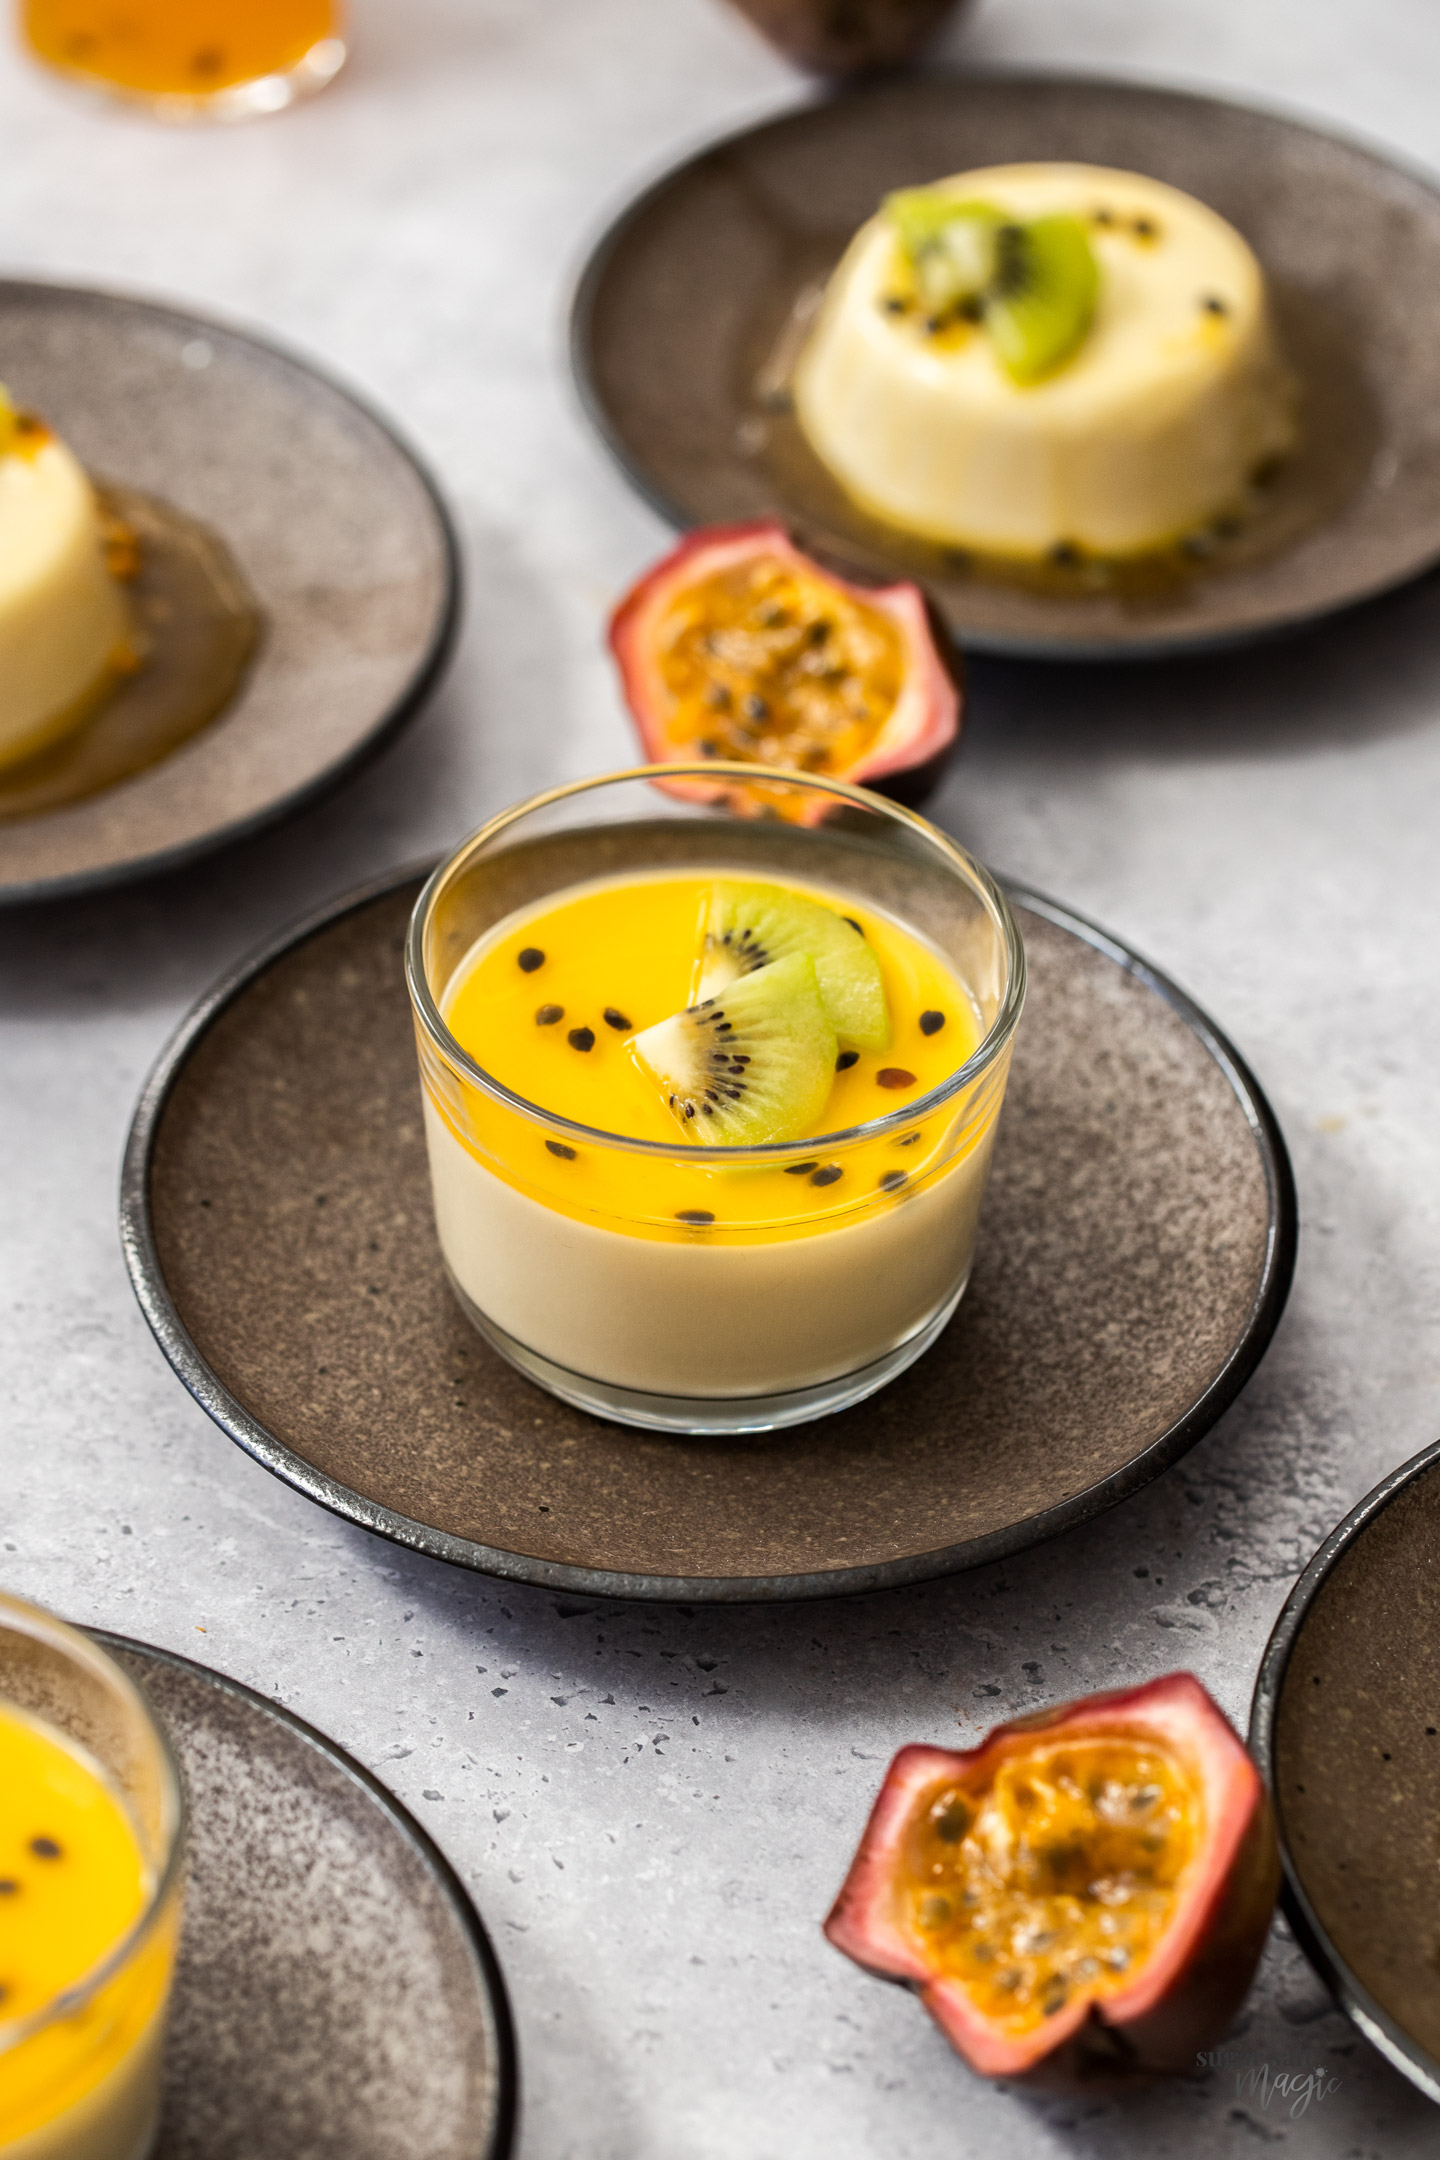 Panna cotta in a glass topped with passionfruit syrup and kiwi fruit slices.